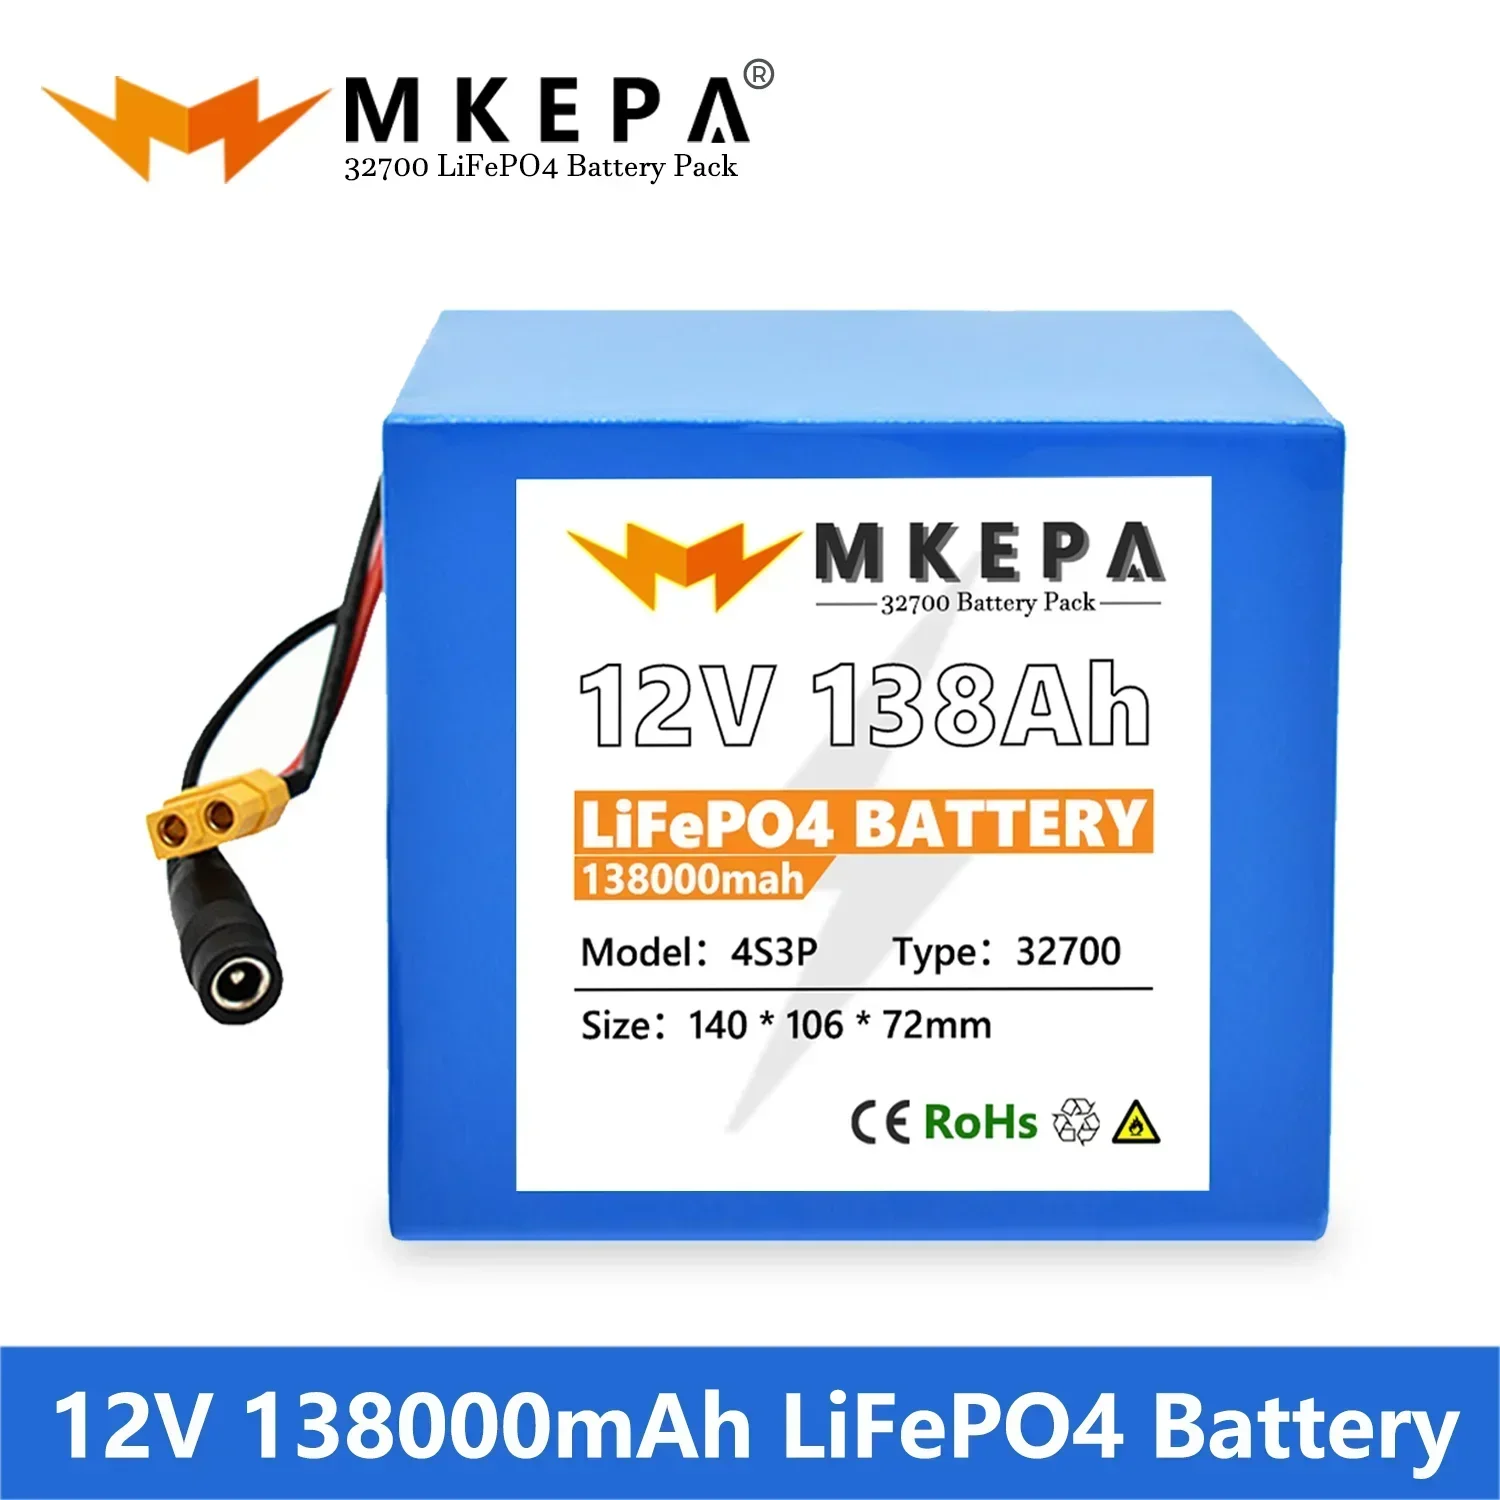 

32700 Lifepo4 Battery 12V Battery Pack 138000mAh 4S3P Built-in 40A Balanced BMS for Electric Boat and Uninterrupted Power Supply